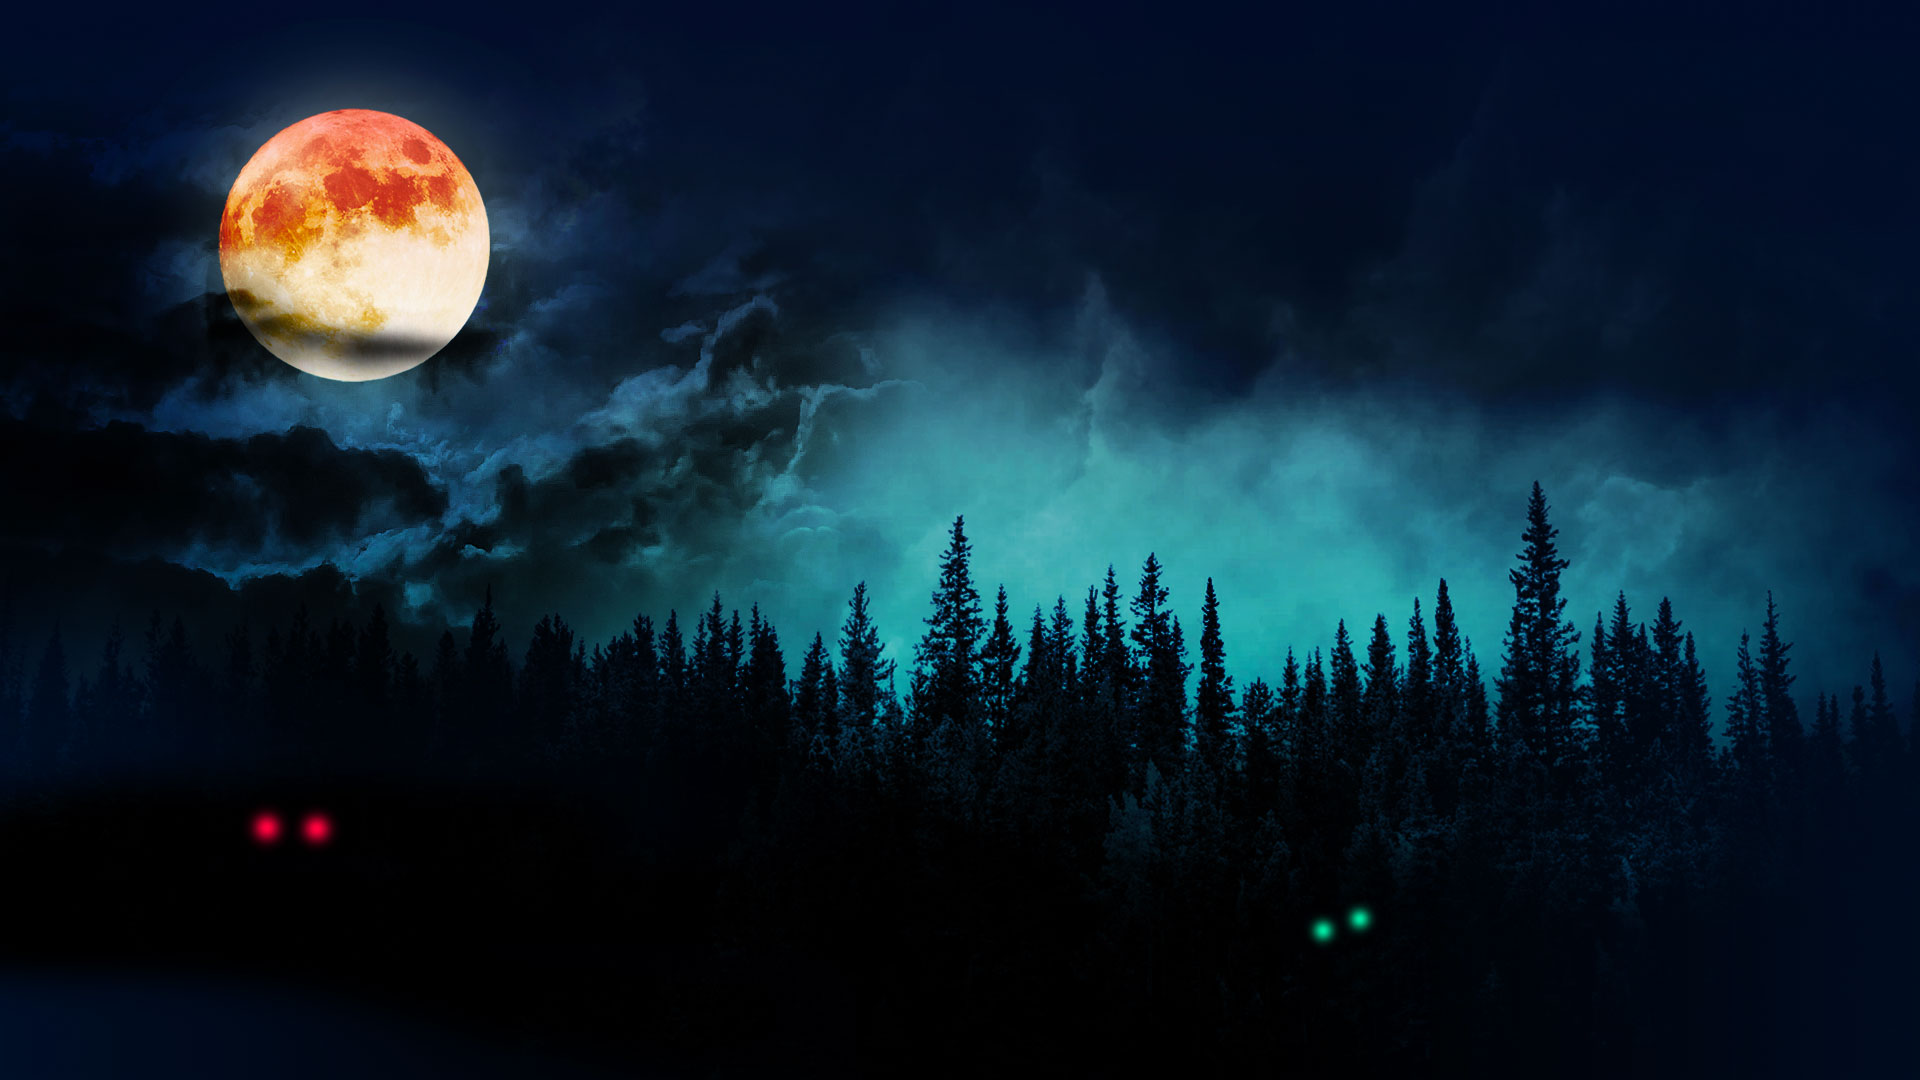 Moonlit night with the moon in the sky and a dark forest beneath. Glowing eyes peering out from the darkness.